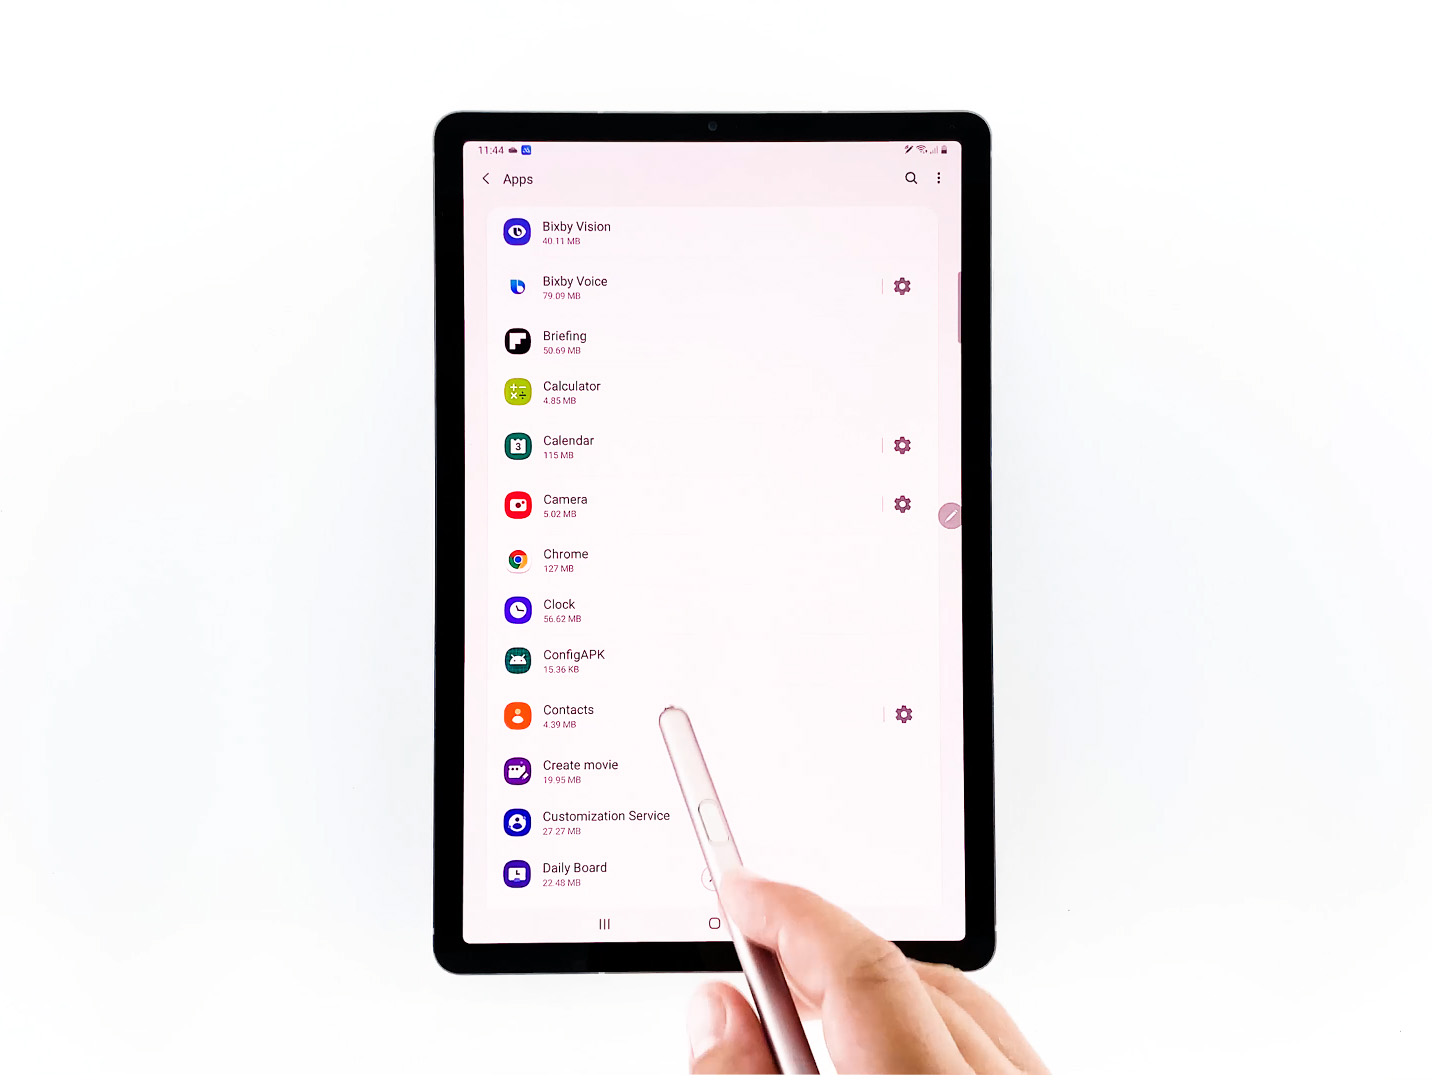 force stop apps galaxy tab s6 - select other apps